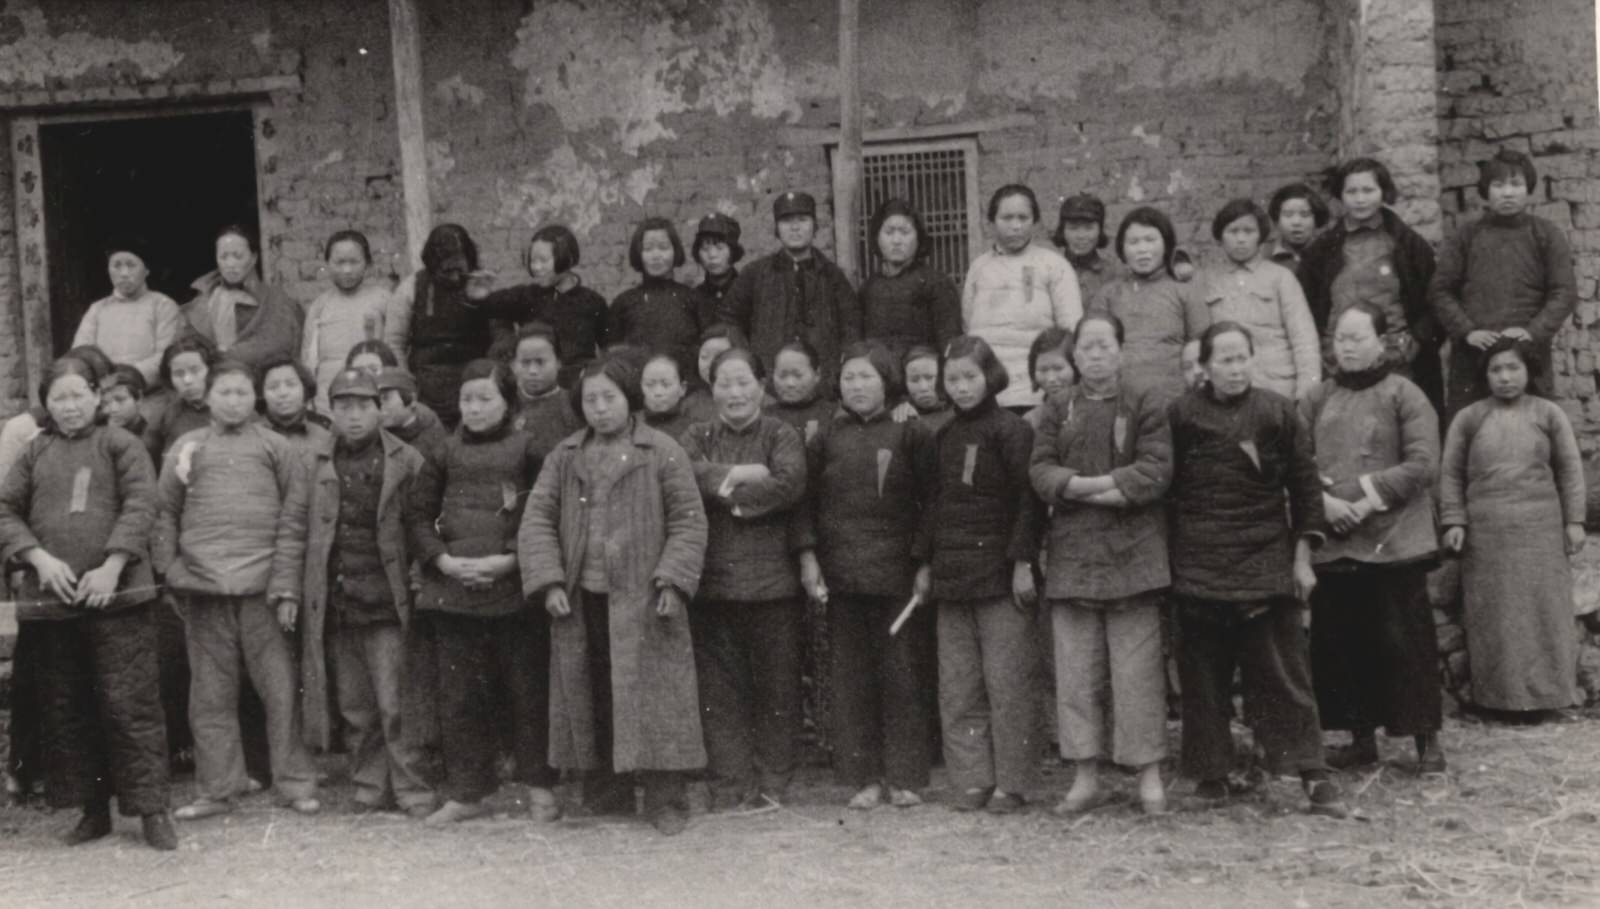 Delegates of first Women's National Salvation Association (11 districts represented) in the enemy rear in Central China. All are simple village woman who have learned to speak and think independently since the war began.